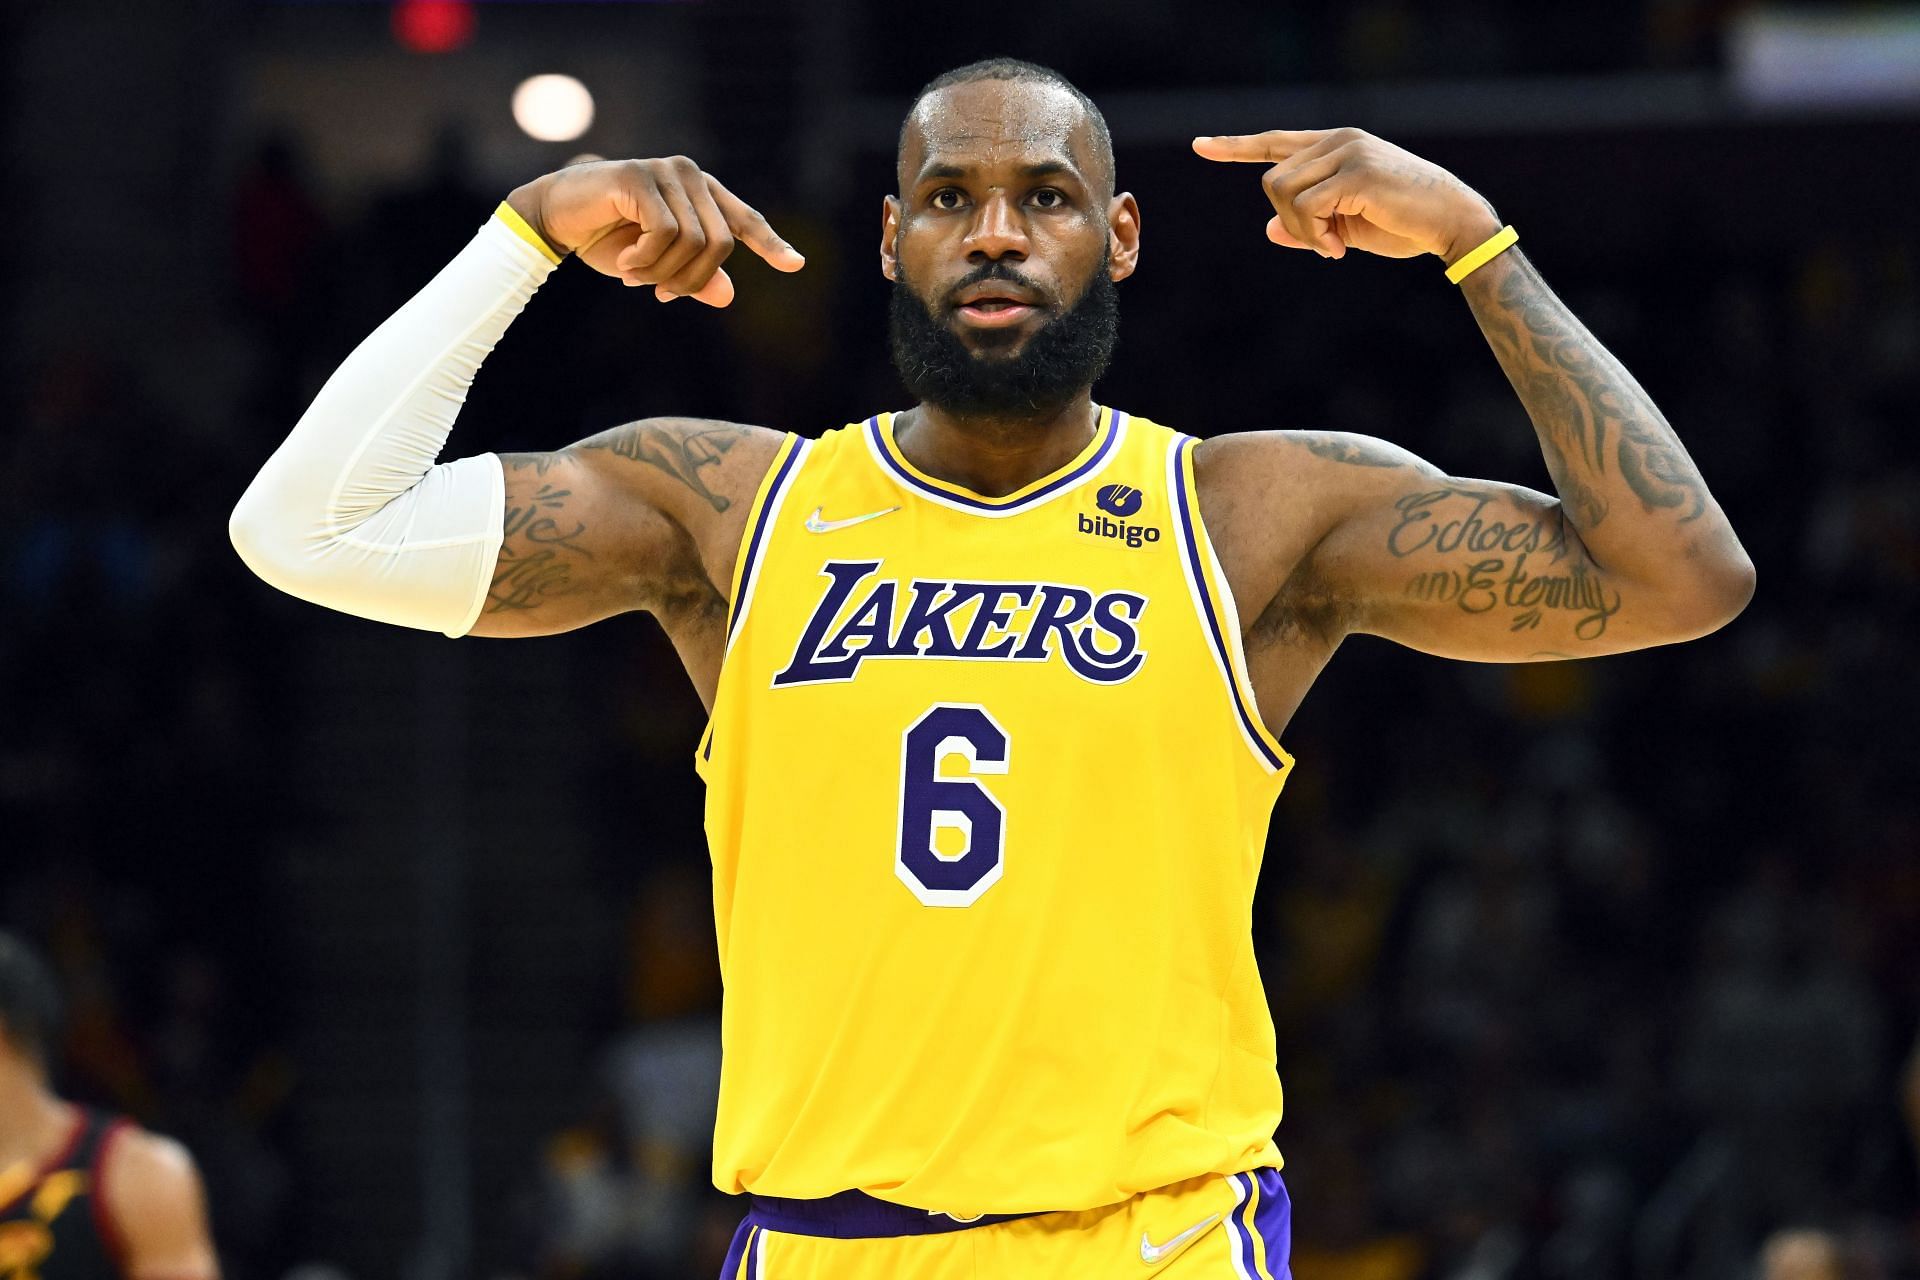 LeBron James of the LA Lakers celebrates during the fourth quarter against the Cleveland Cavaliers at Rocket Mortgage Fieldhouse on March 21 in Cleveland, Ohio. The Lakers defeated the Cavaliers 131-120.